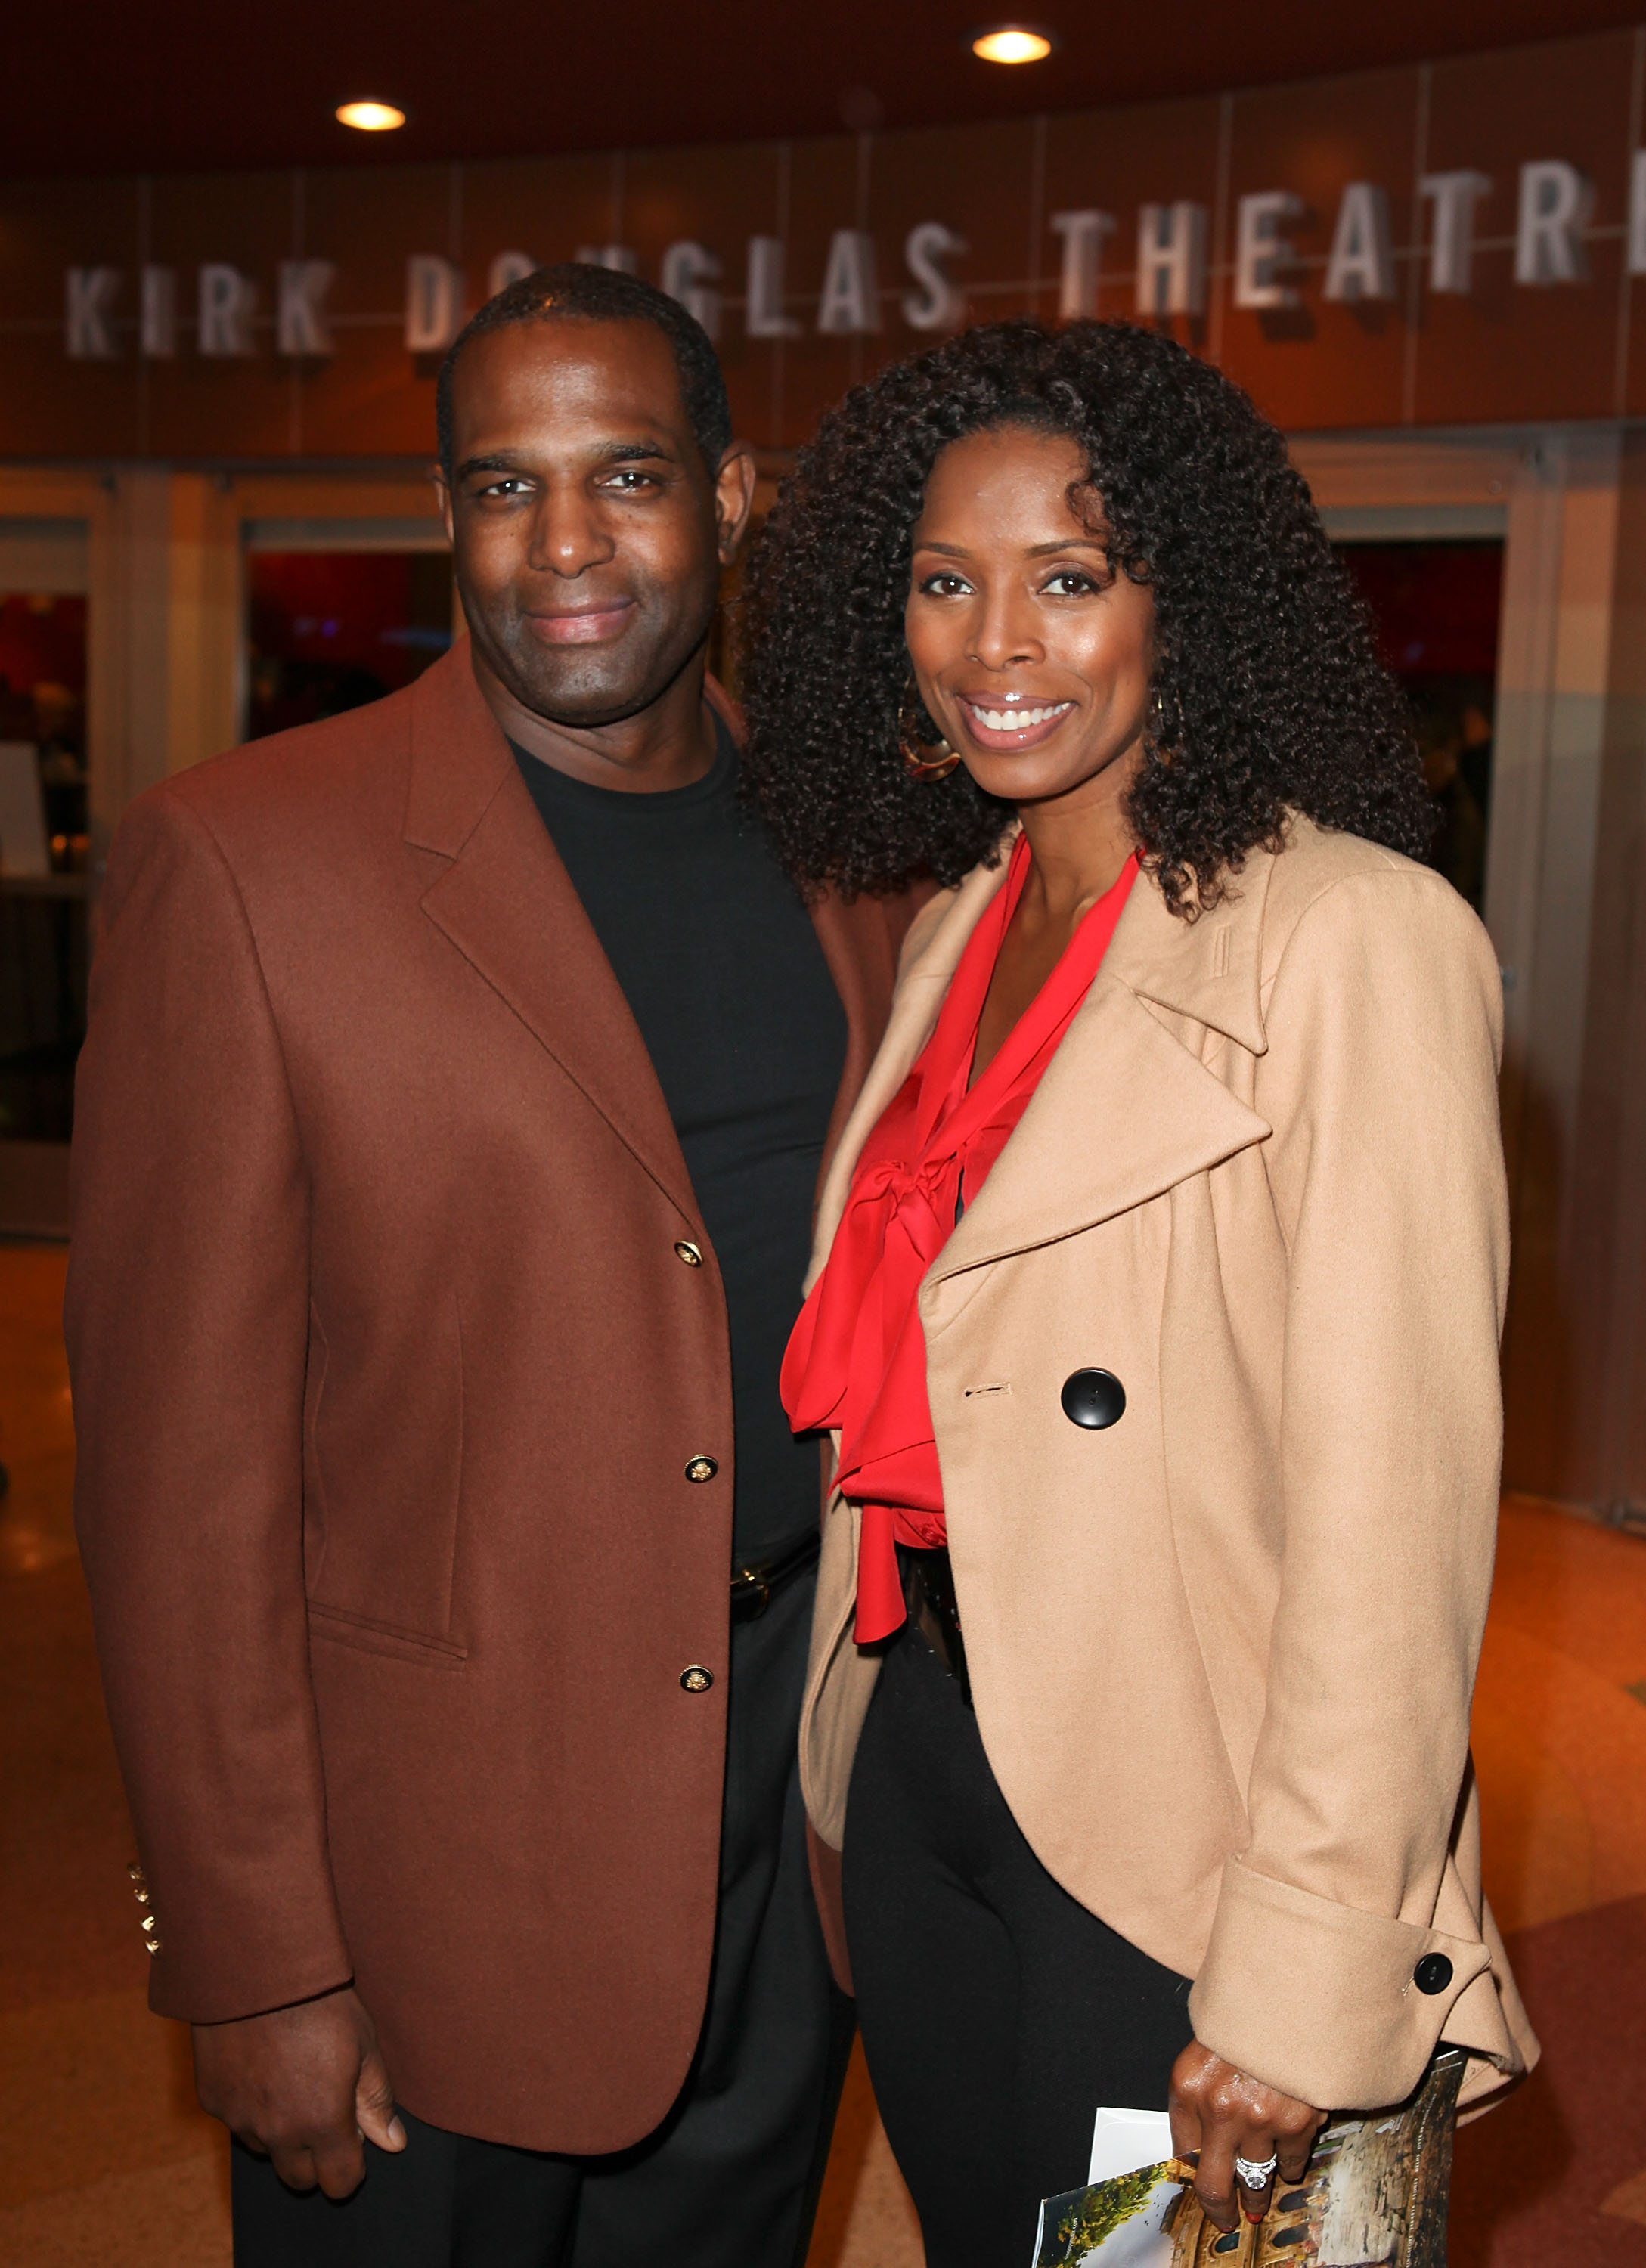 Keith Douglas and Tasha Smith at the opening night performance of Ebony Repertory Theatre's production of "A Raisin in the Sun" on January 1, 2012 in Culver City, California. | Source: Getty Images